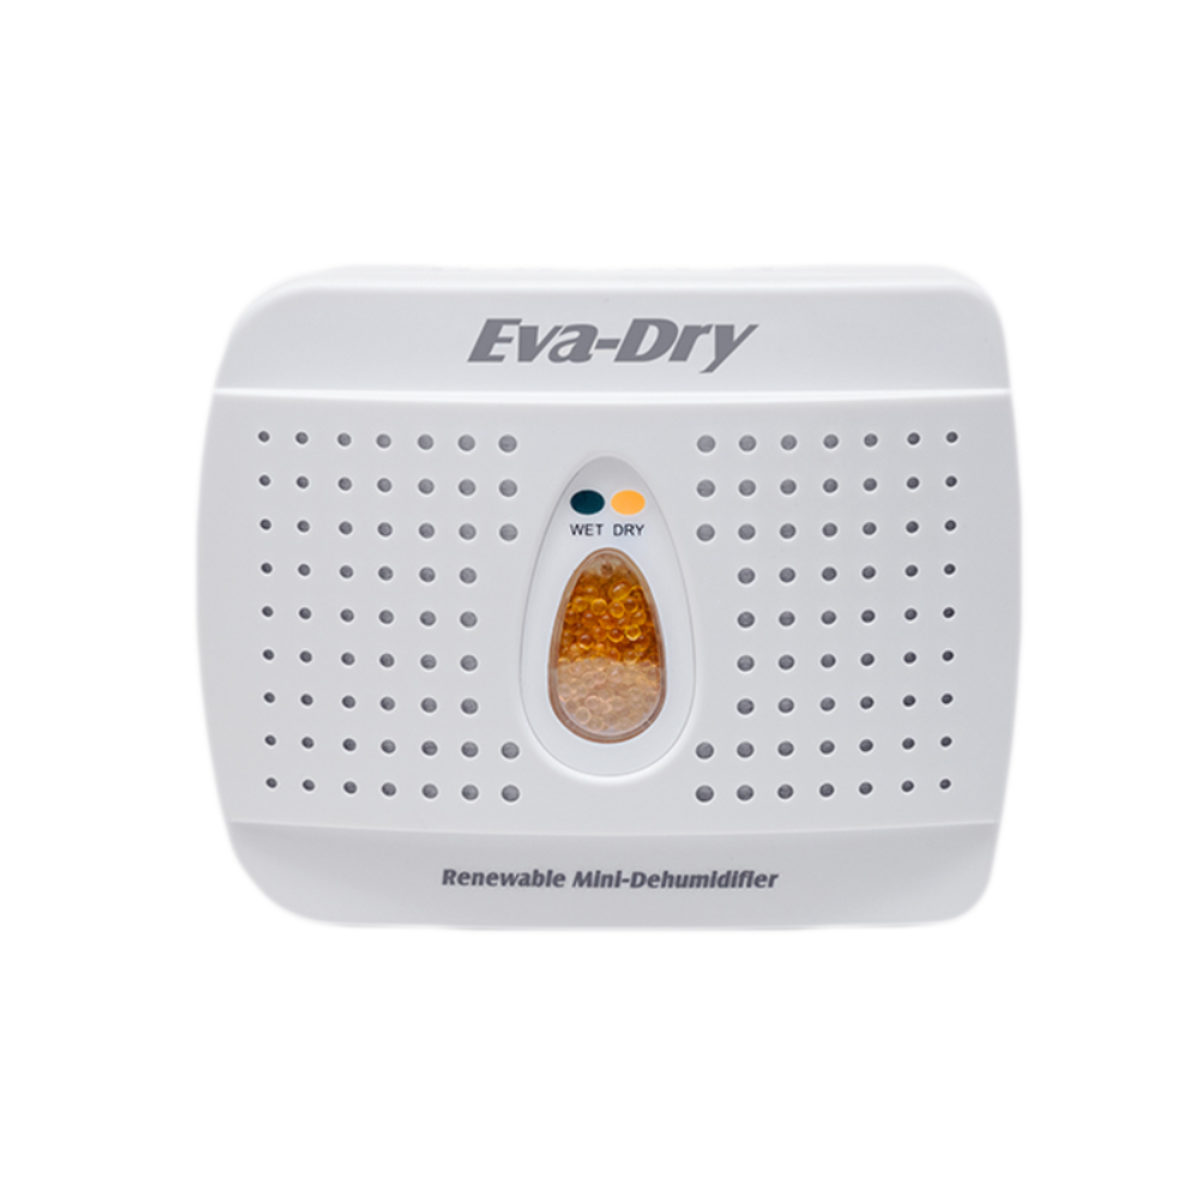 New and Improved Eva-dry E-333 Renewable Mini Dehumidifier Dehumidifiers  Heating, Cooling & Air